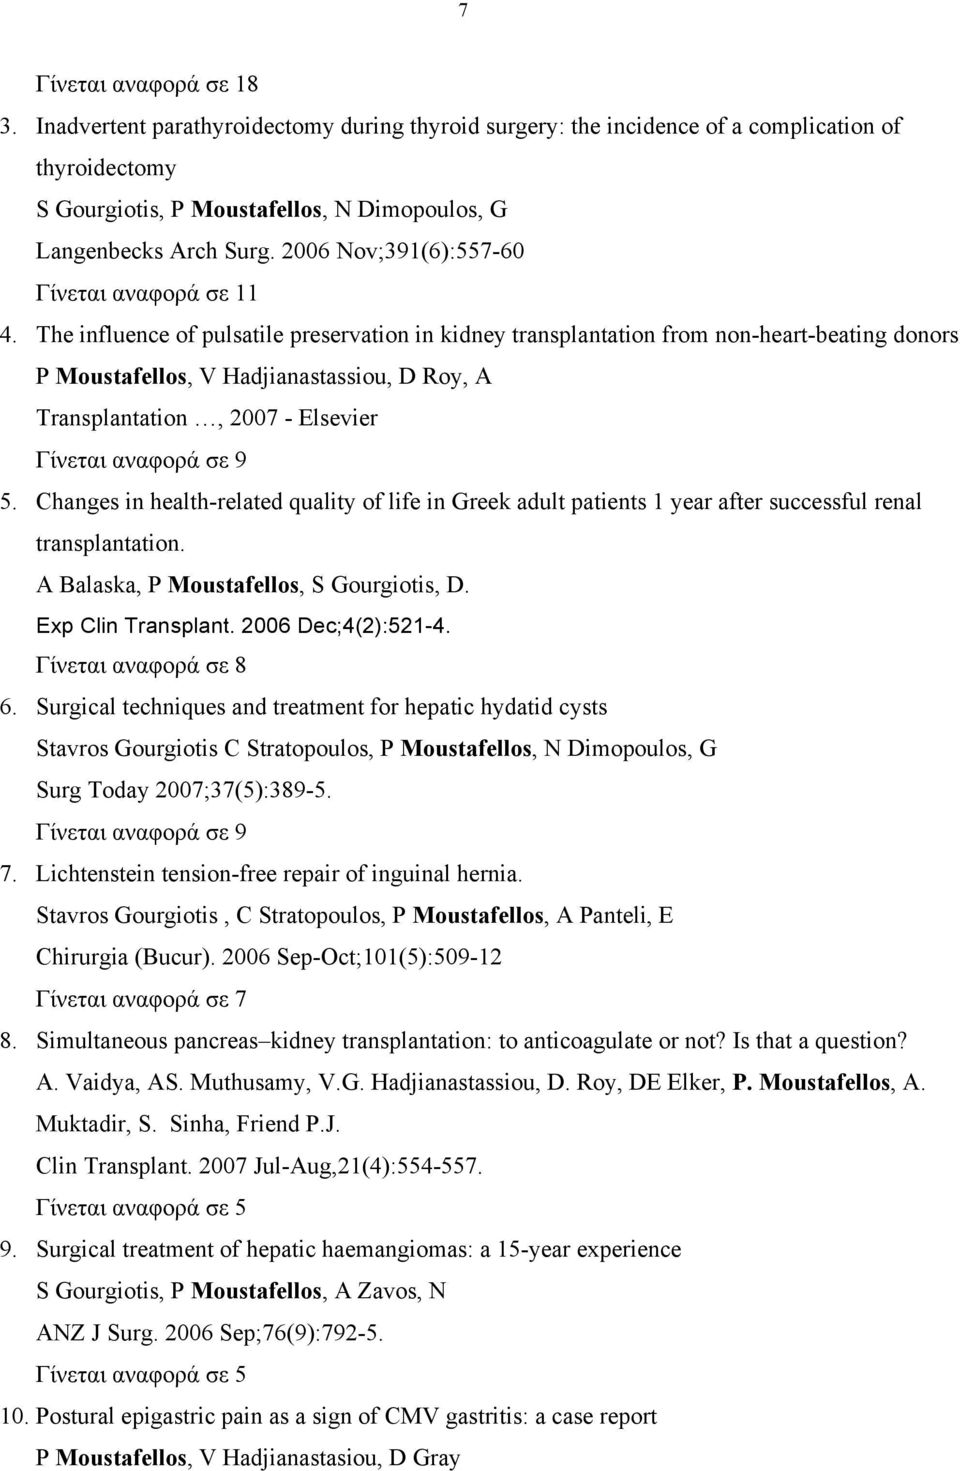 The influence of pulsatile preservation in kidney transplantation from non-heart-beating donors P Moustafellos, V Hadjianastassiou, D Roy, A Transplantation, 2007 - Elsevier Γίνεται αναφορά σε 9 5.